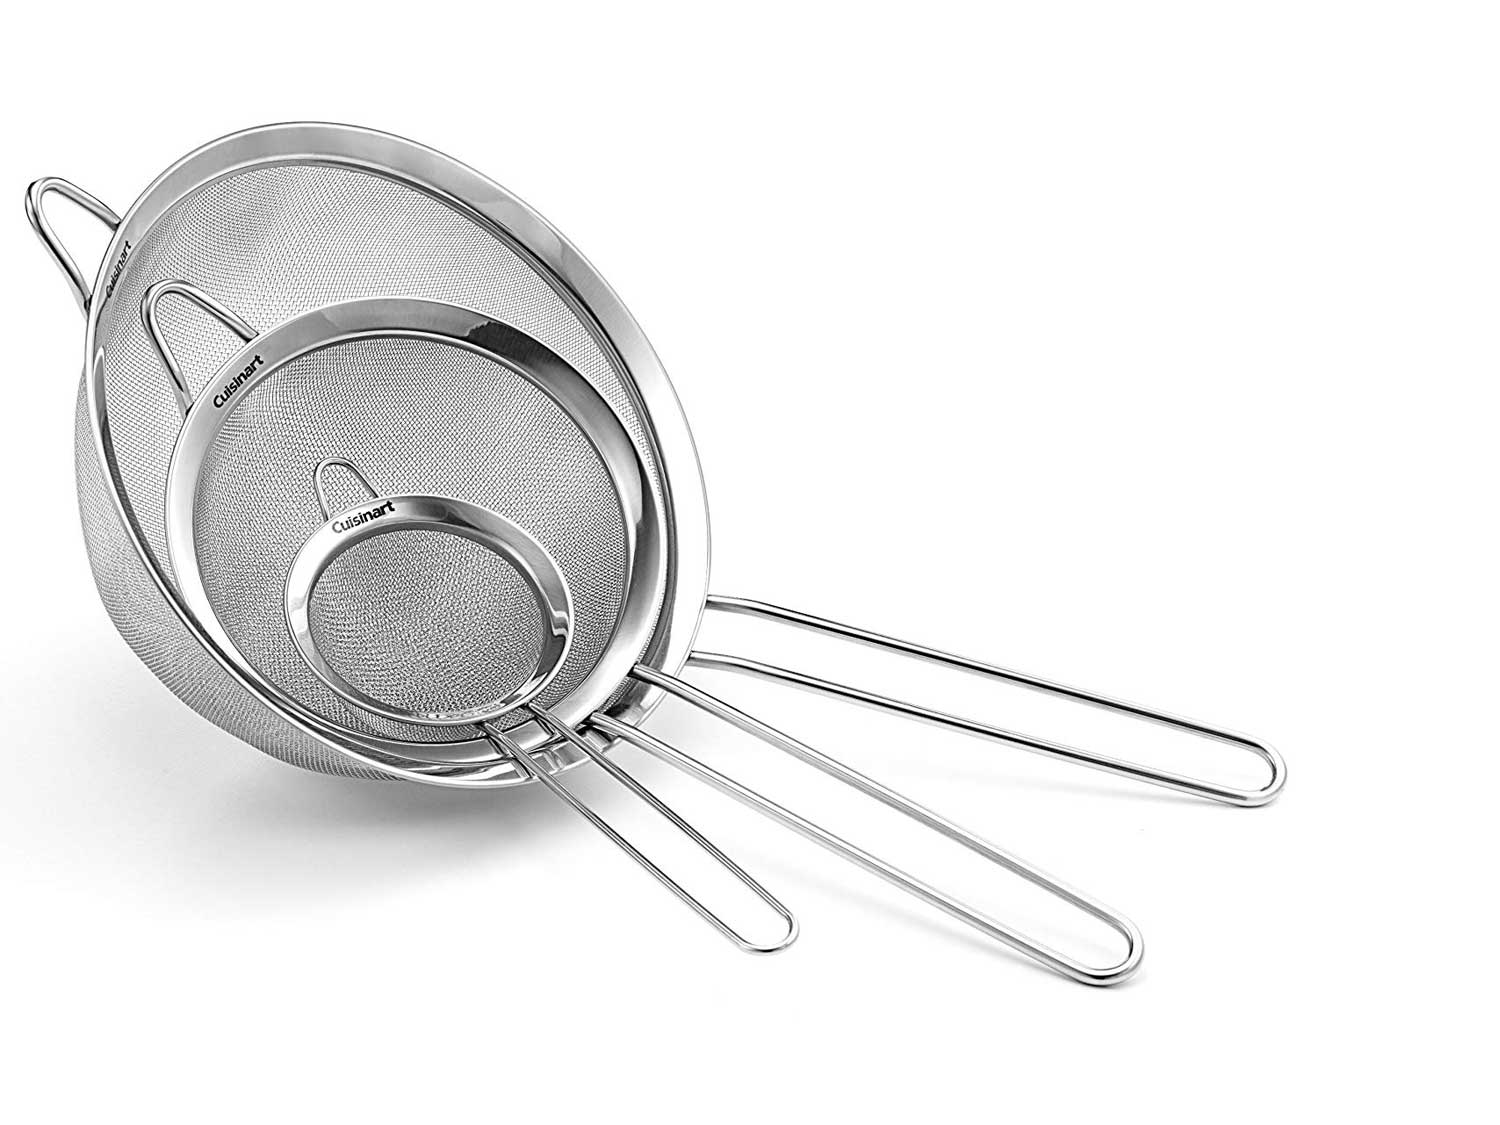 Cuisinart Fine Mesh Stainless Steel Strainers (Set of 3)